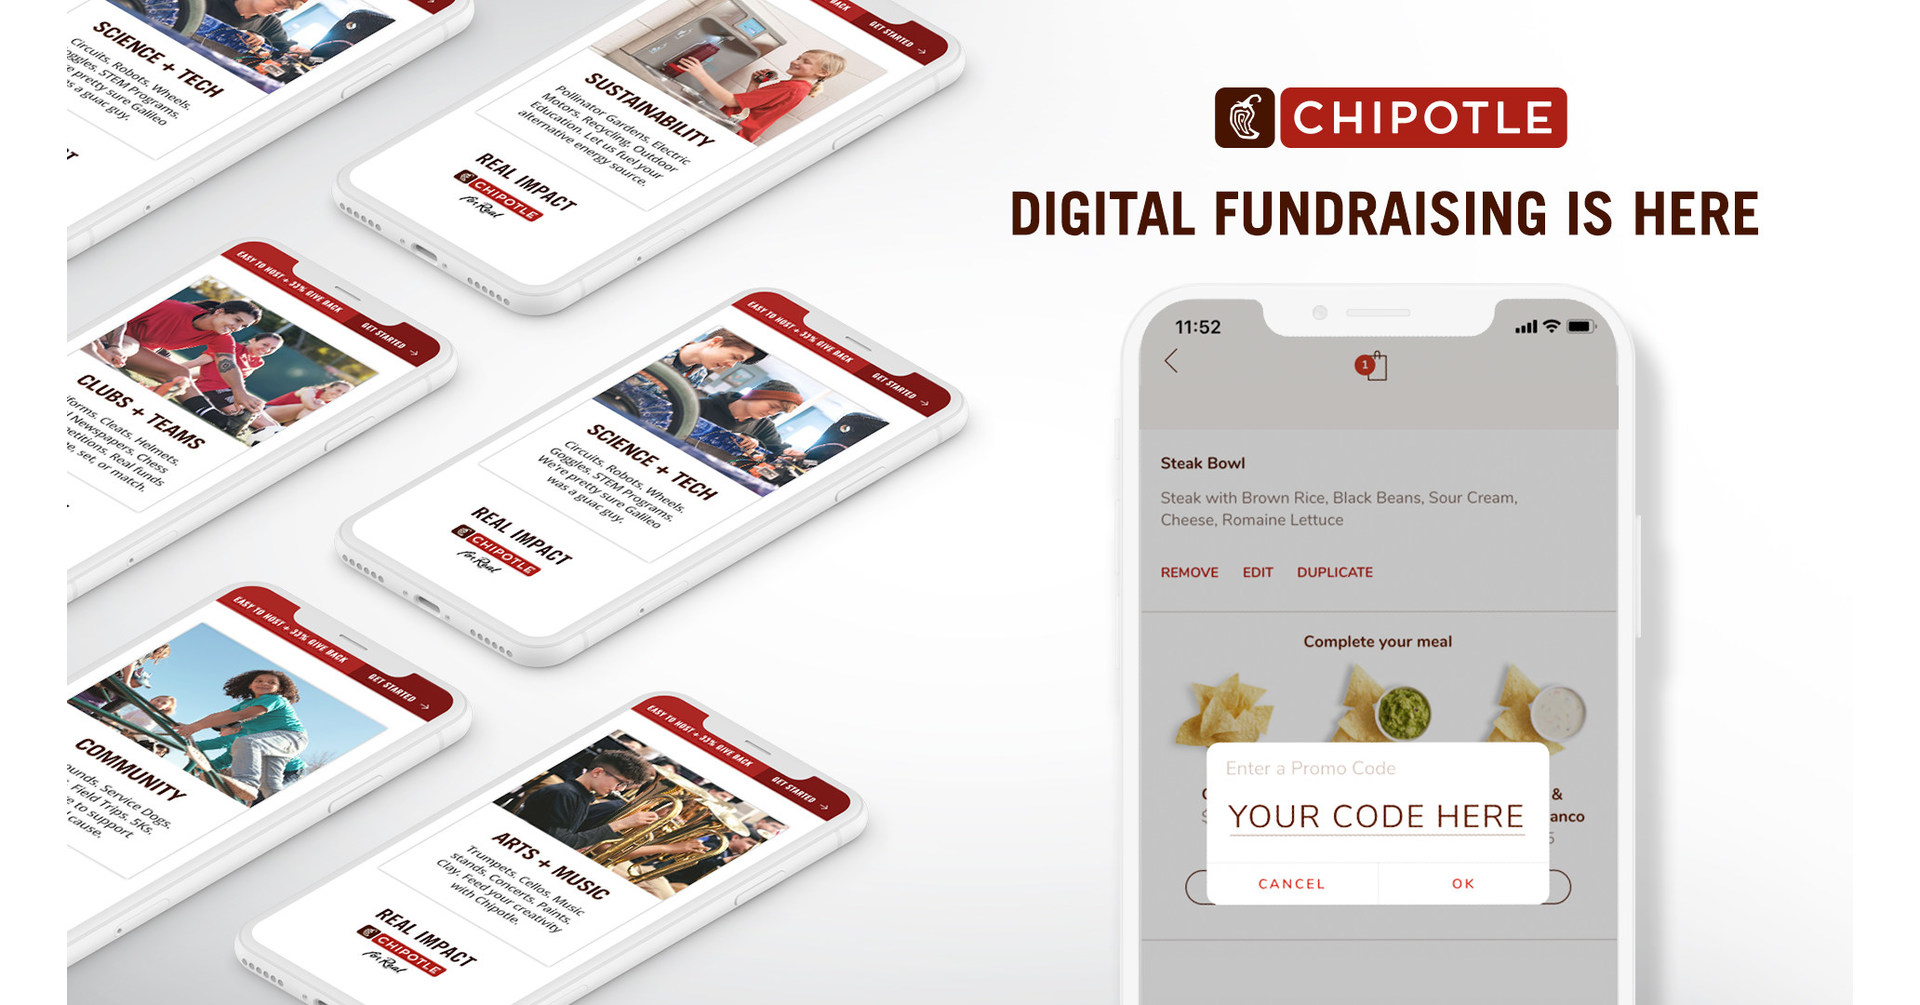 Chipotle Leverages New Fundraising Technology To Support Under-Resourced Students